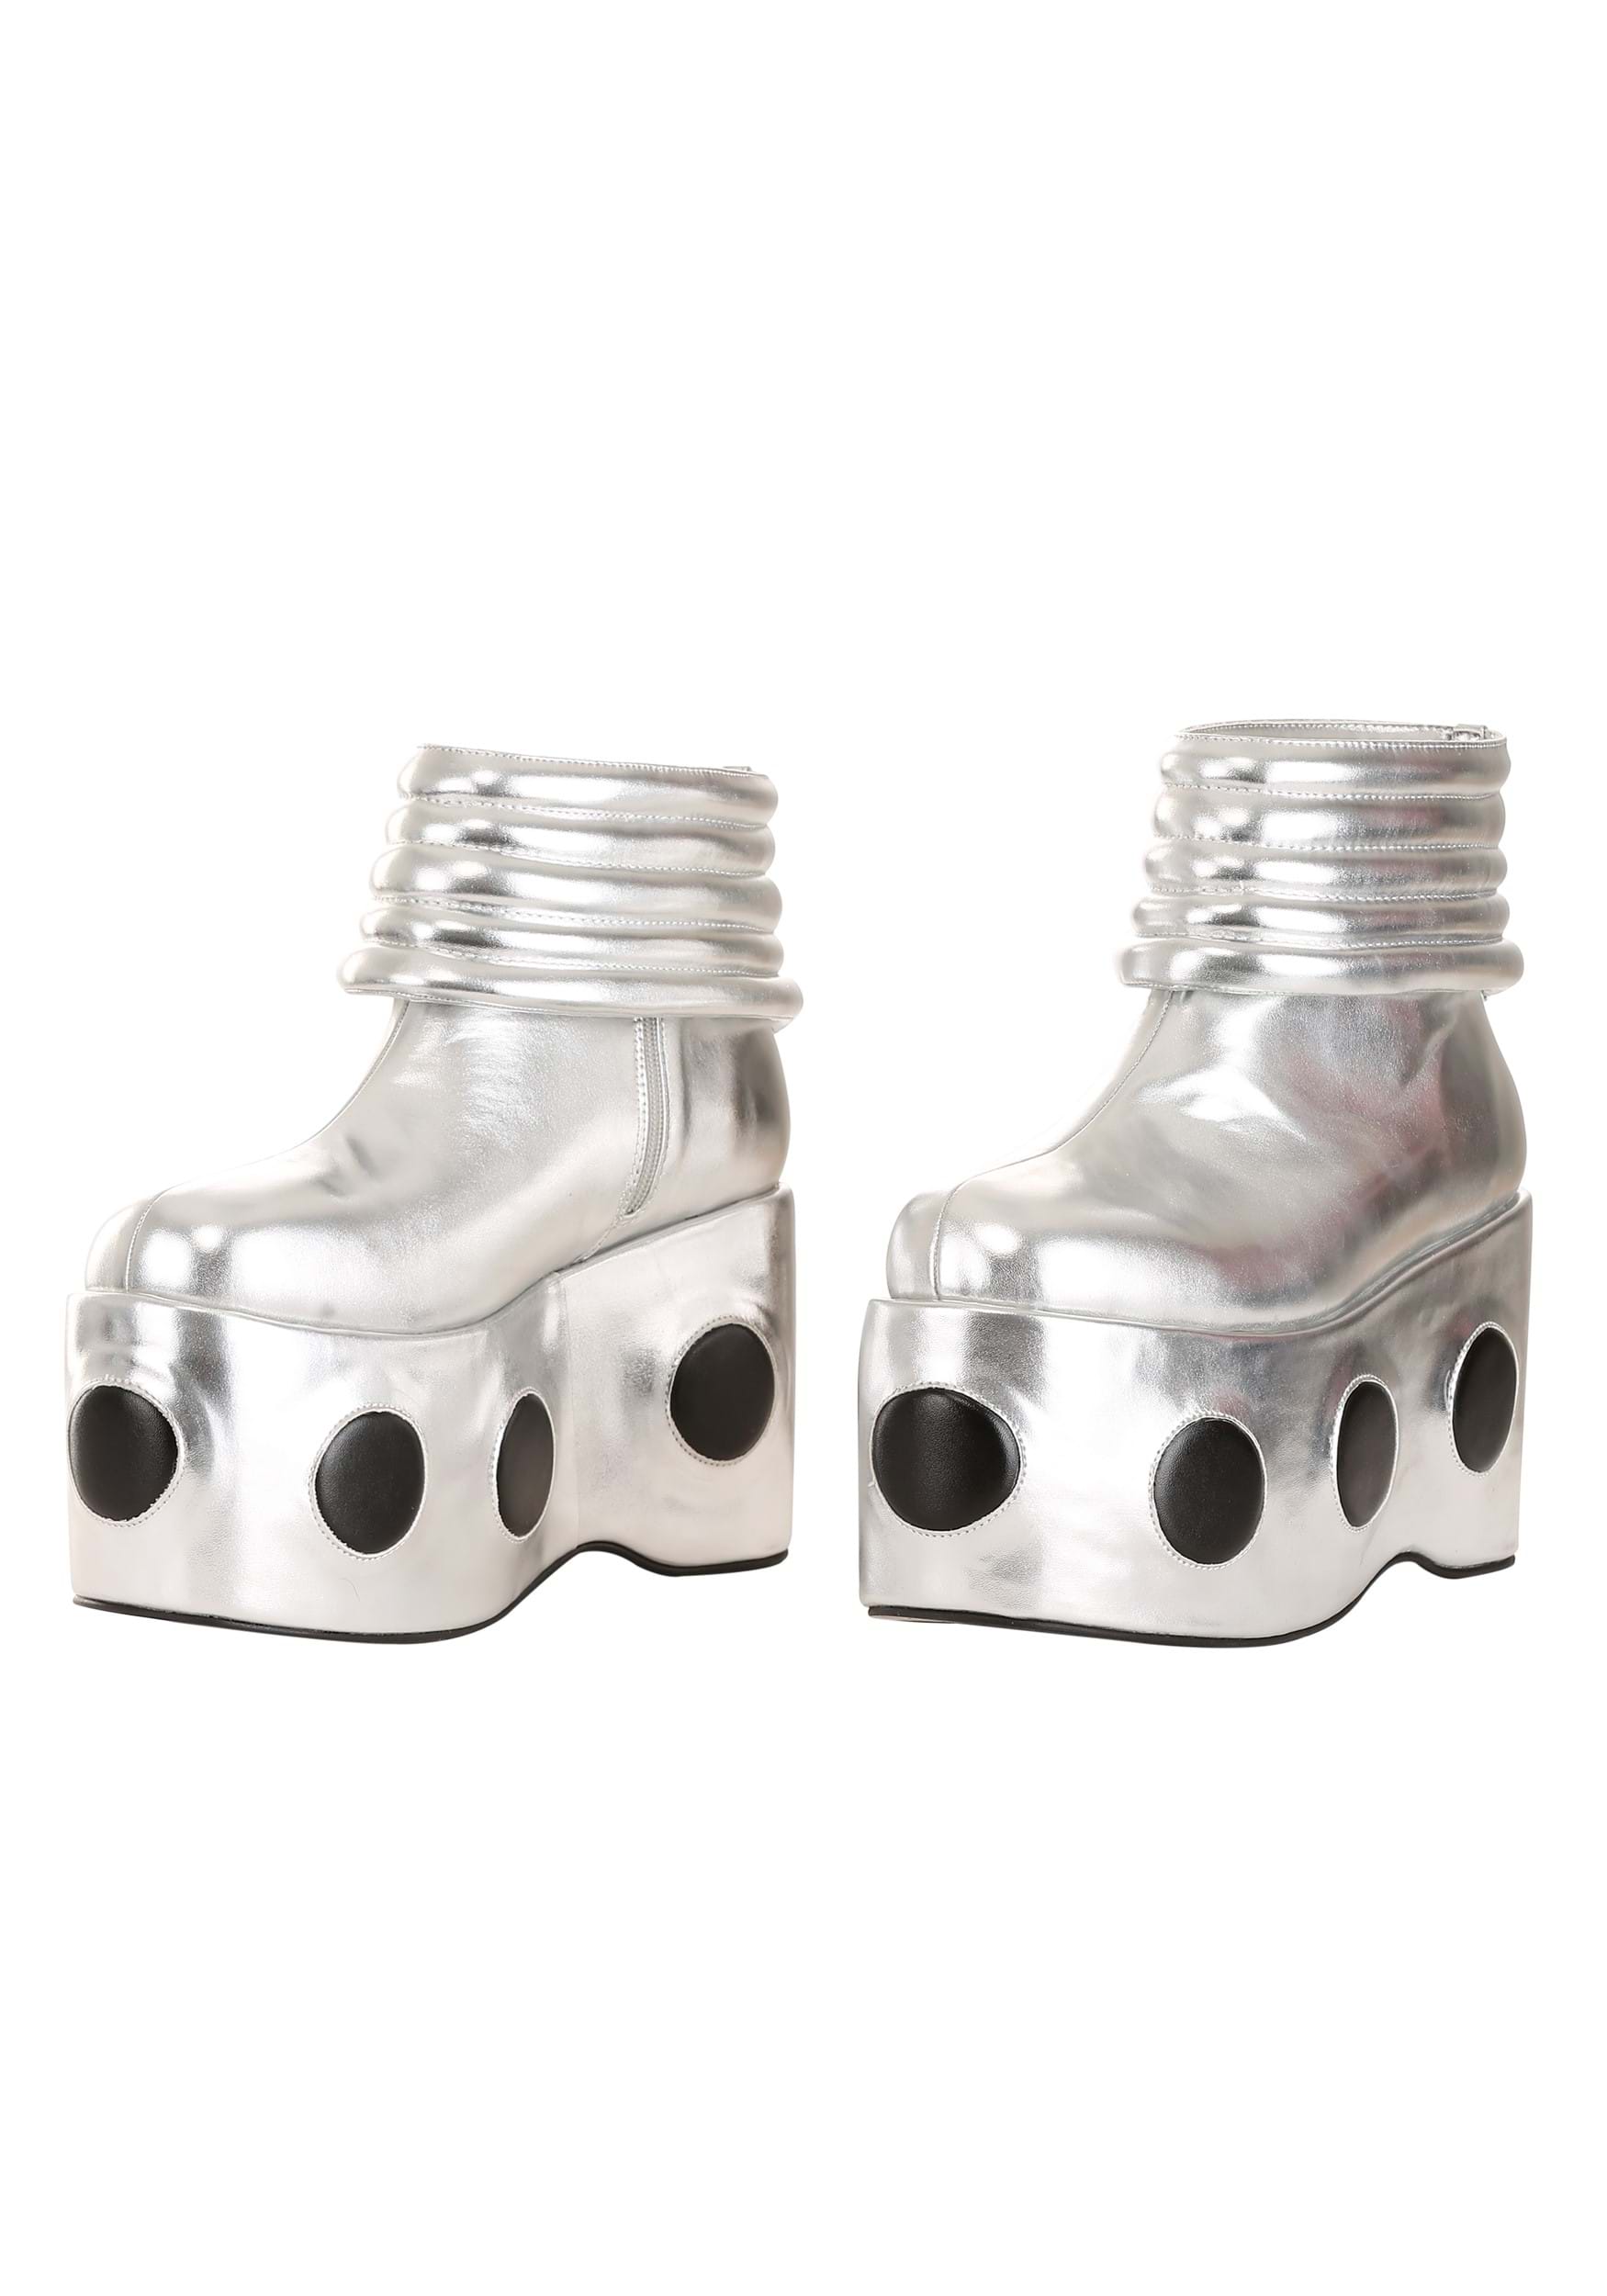 KISS Spaceman Boots , Exclusive Fancy Dress Costume Boots